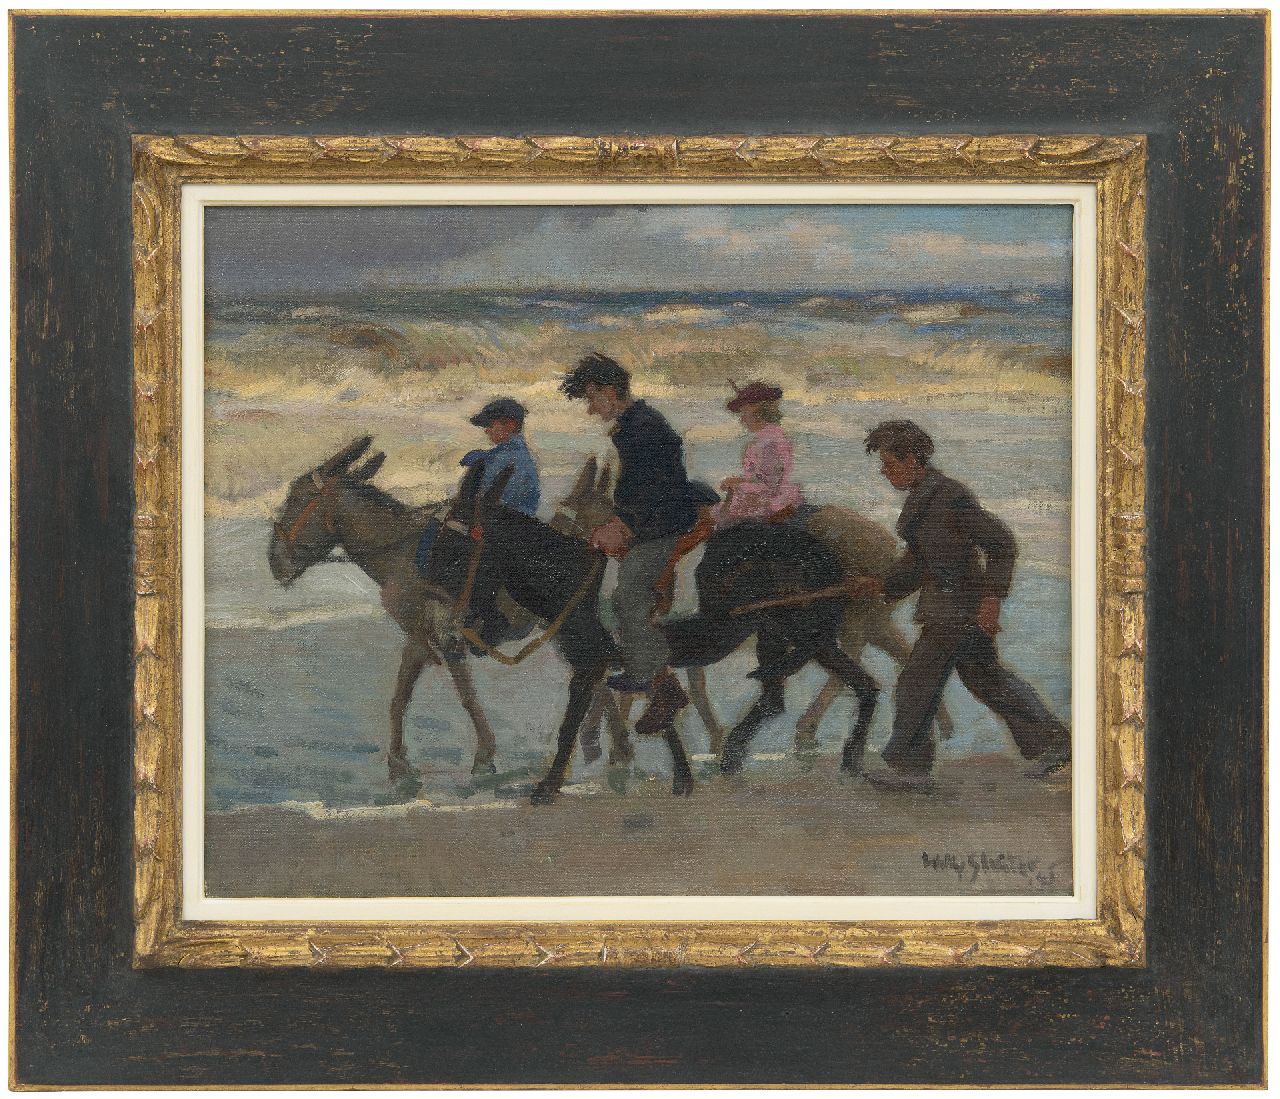 Sluiter J.W.  | Jan Willem 'Willy' Sluiter | Paintings offered for sale | Donkey ride on the beach, oil on canvas laid down on panel 40.1 x 50.3 cm, signed l.r. and dated '48